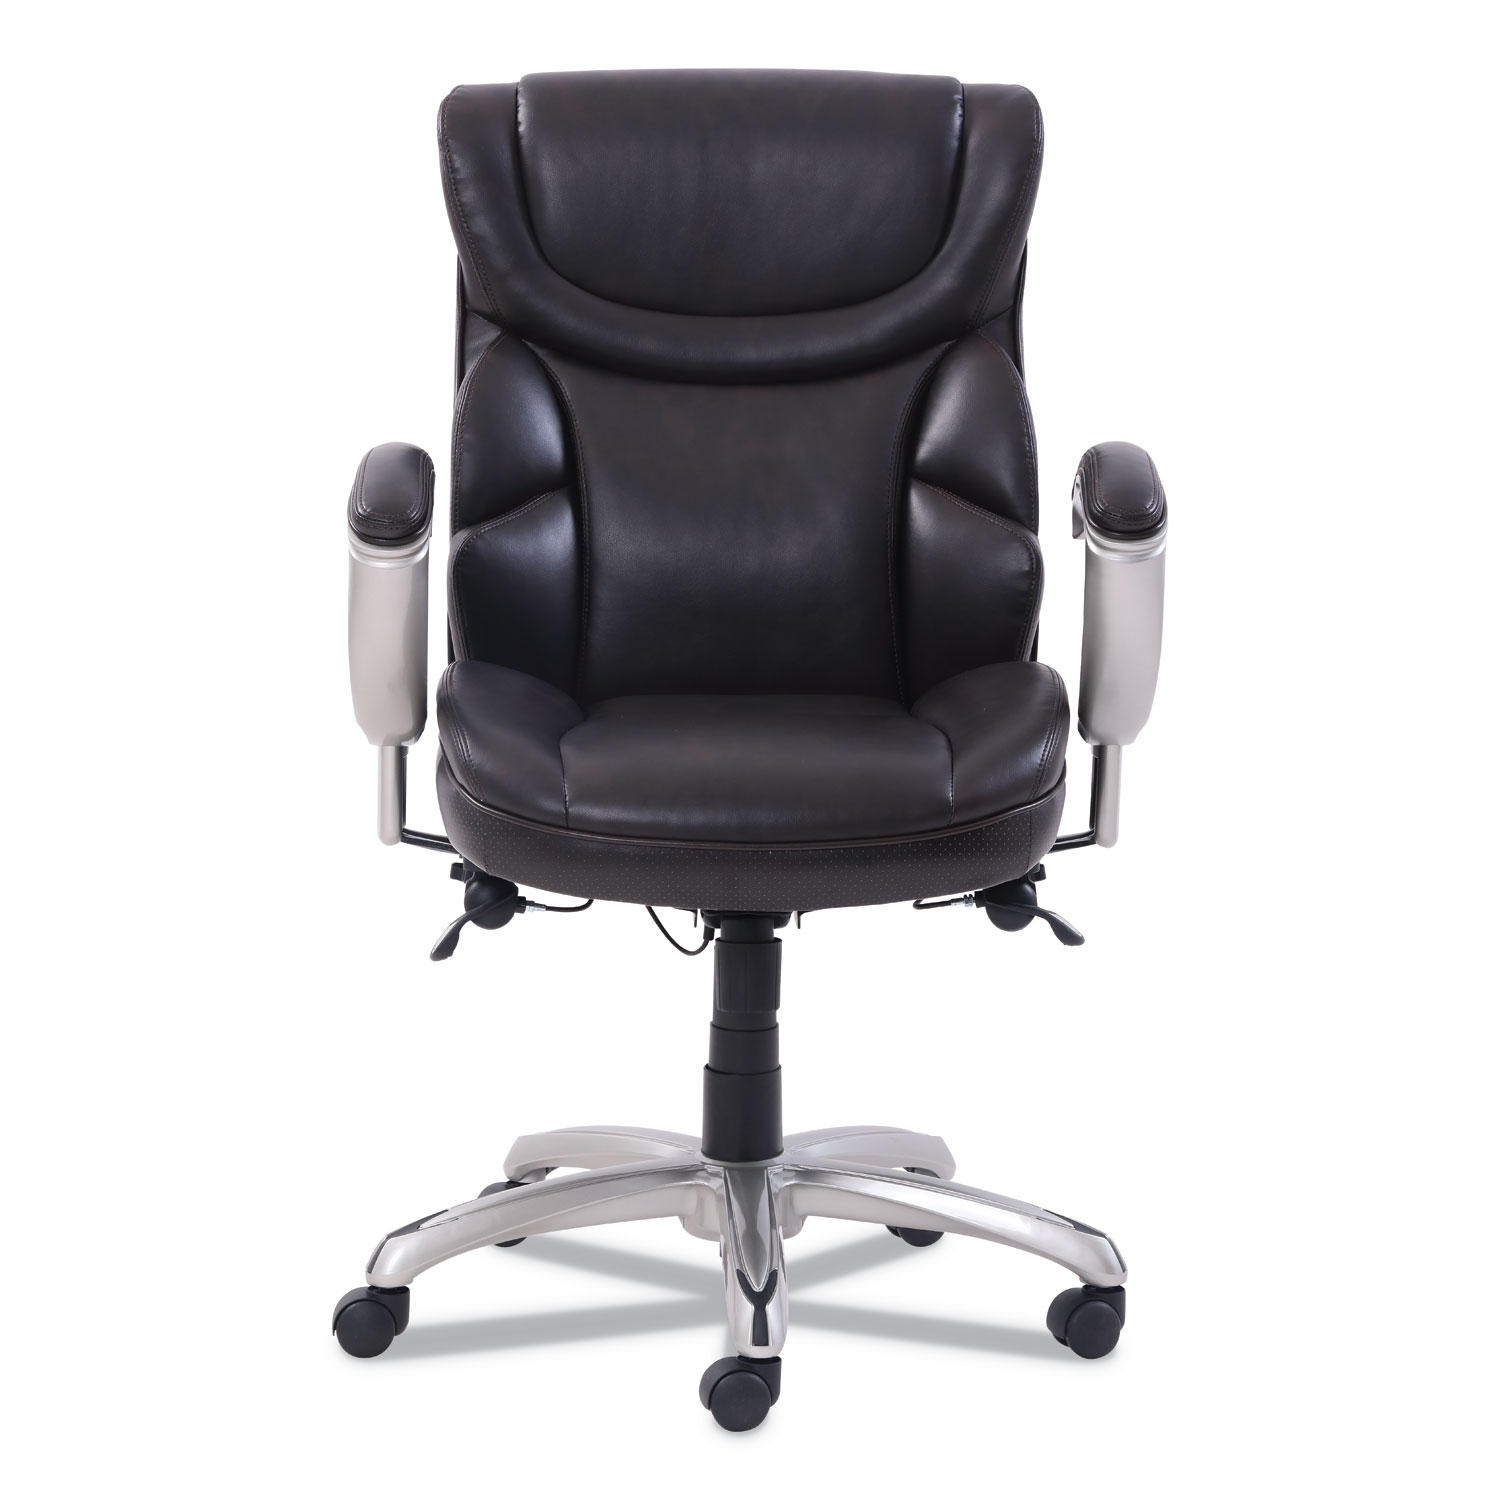 Emerson Task Chair, Supports up to 300 lbs., Brown Seat/Brown Back, Silver Base